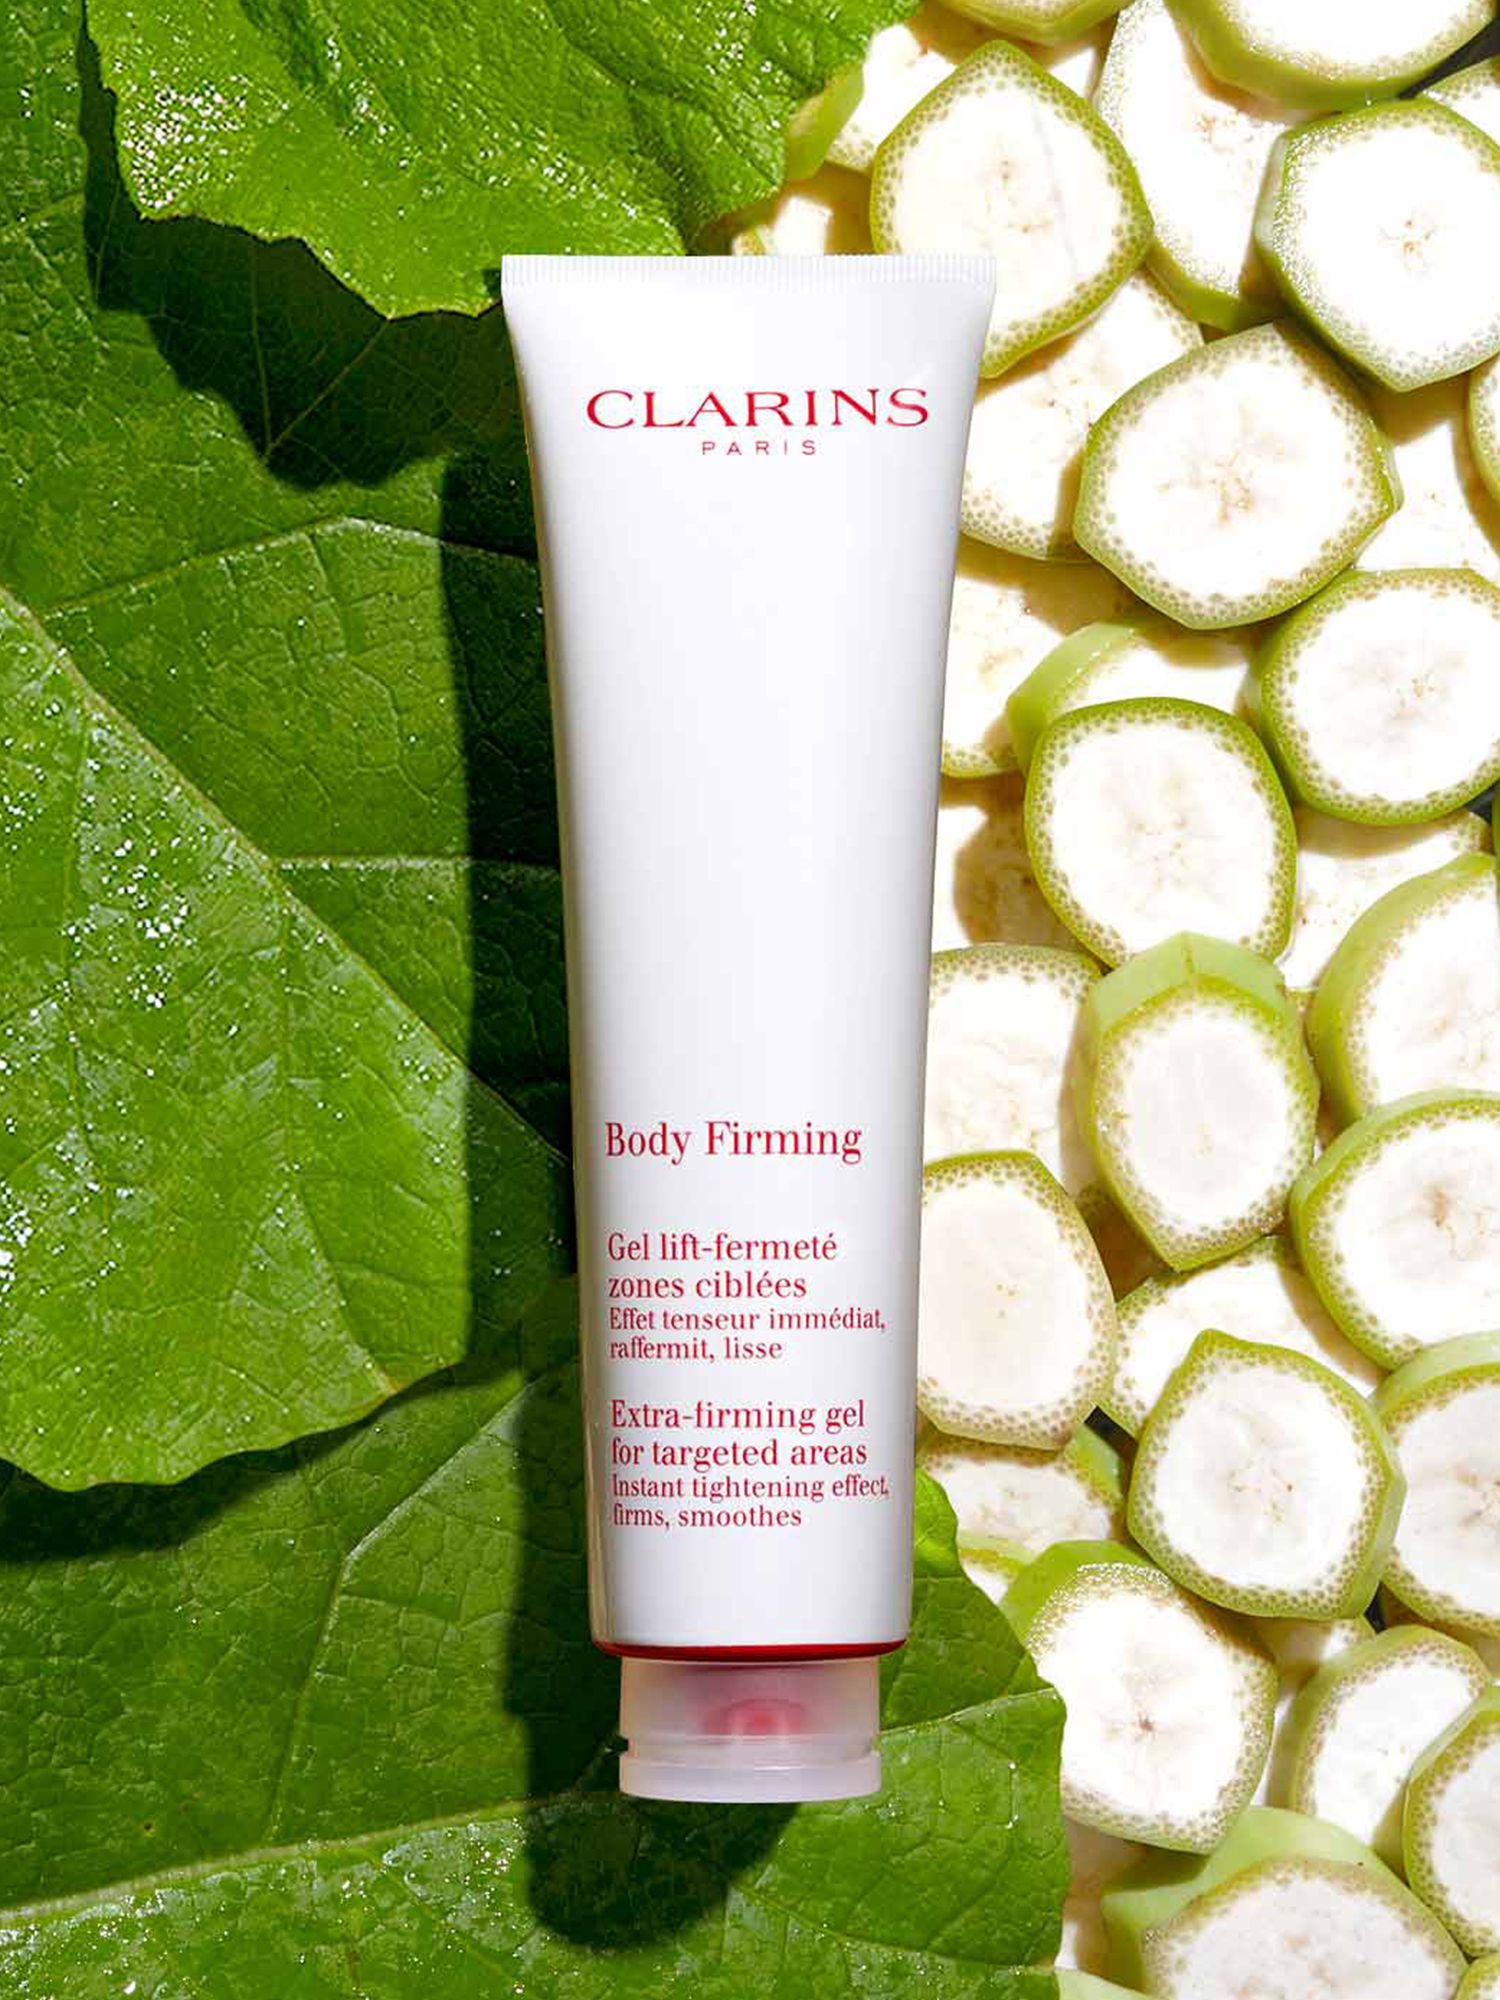 Clarins Body Firming Extra-Firming Review - Escentual's Blog